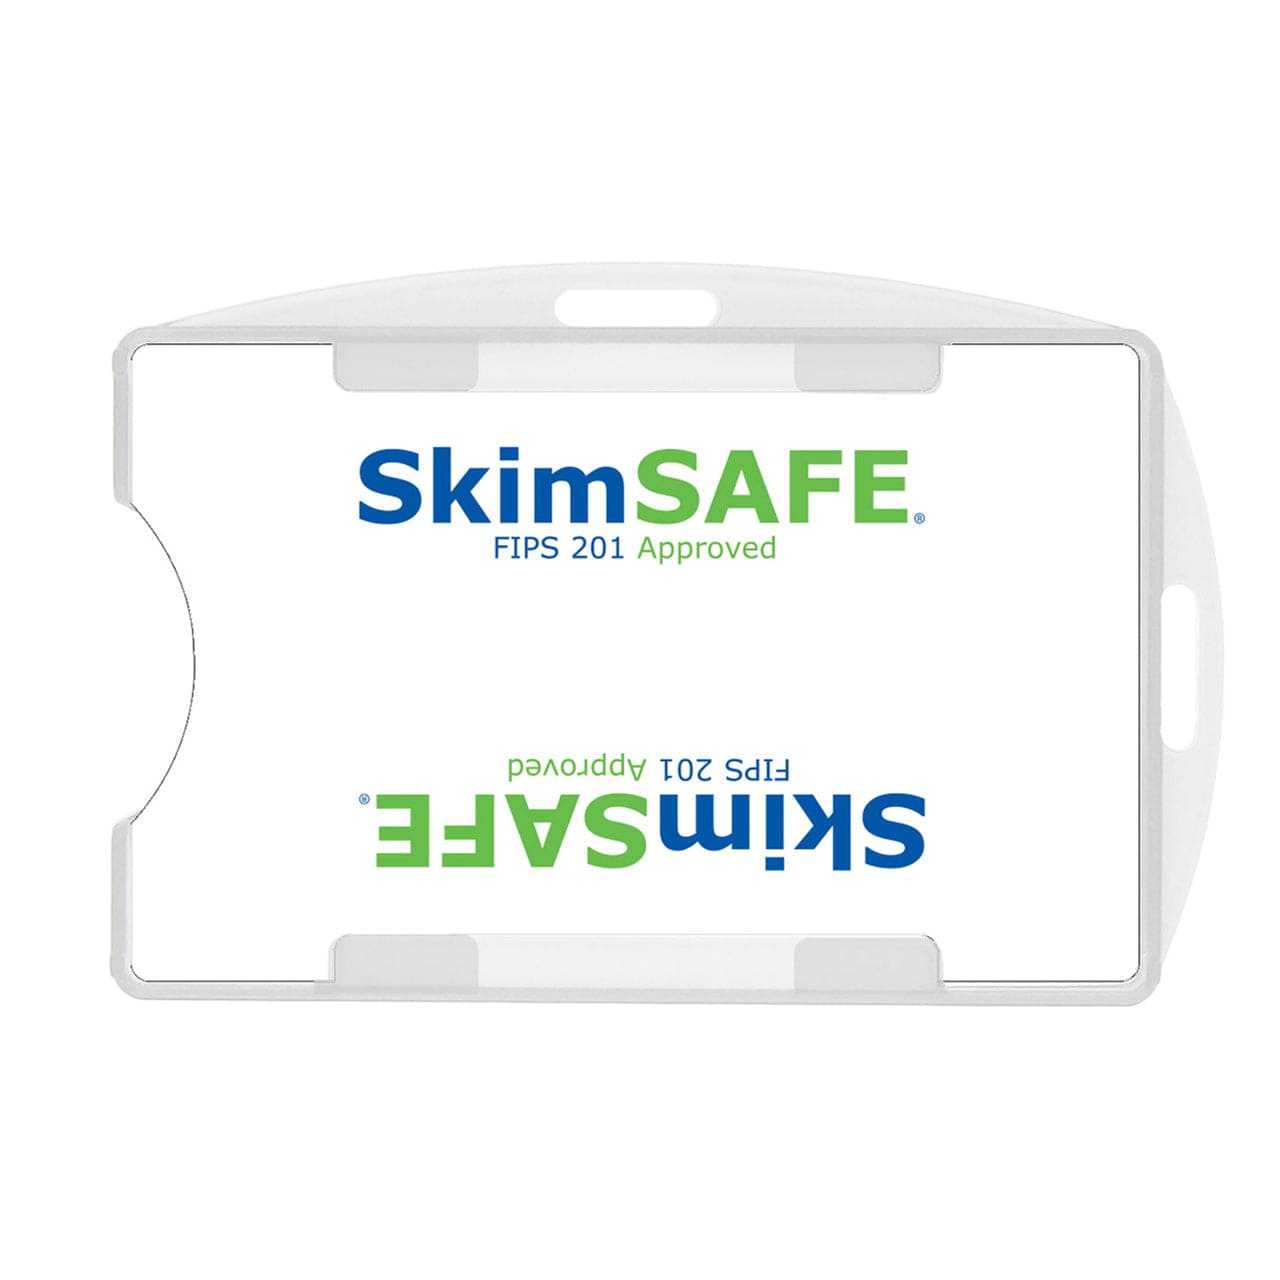 A white SkimSAFE FIPS 201 RFID Blocking 2-Card ID Holder (AH-210) with "FIPS 201 Approved" written in green text on the front and inverted on the back. This secure ID holder ensures your cards are protected from unwanted scans.